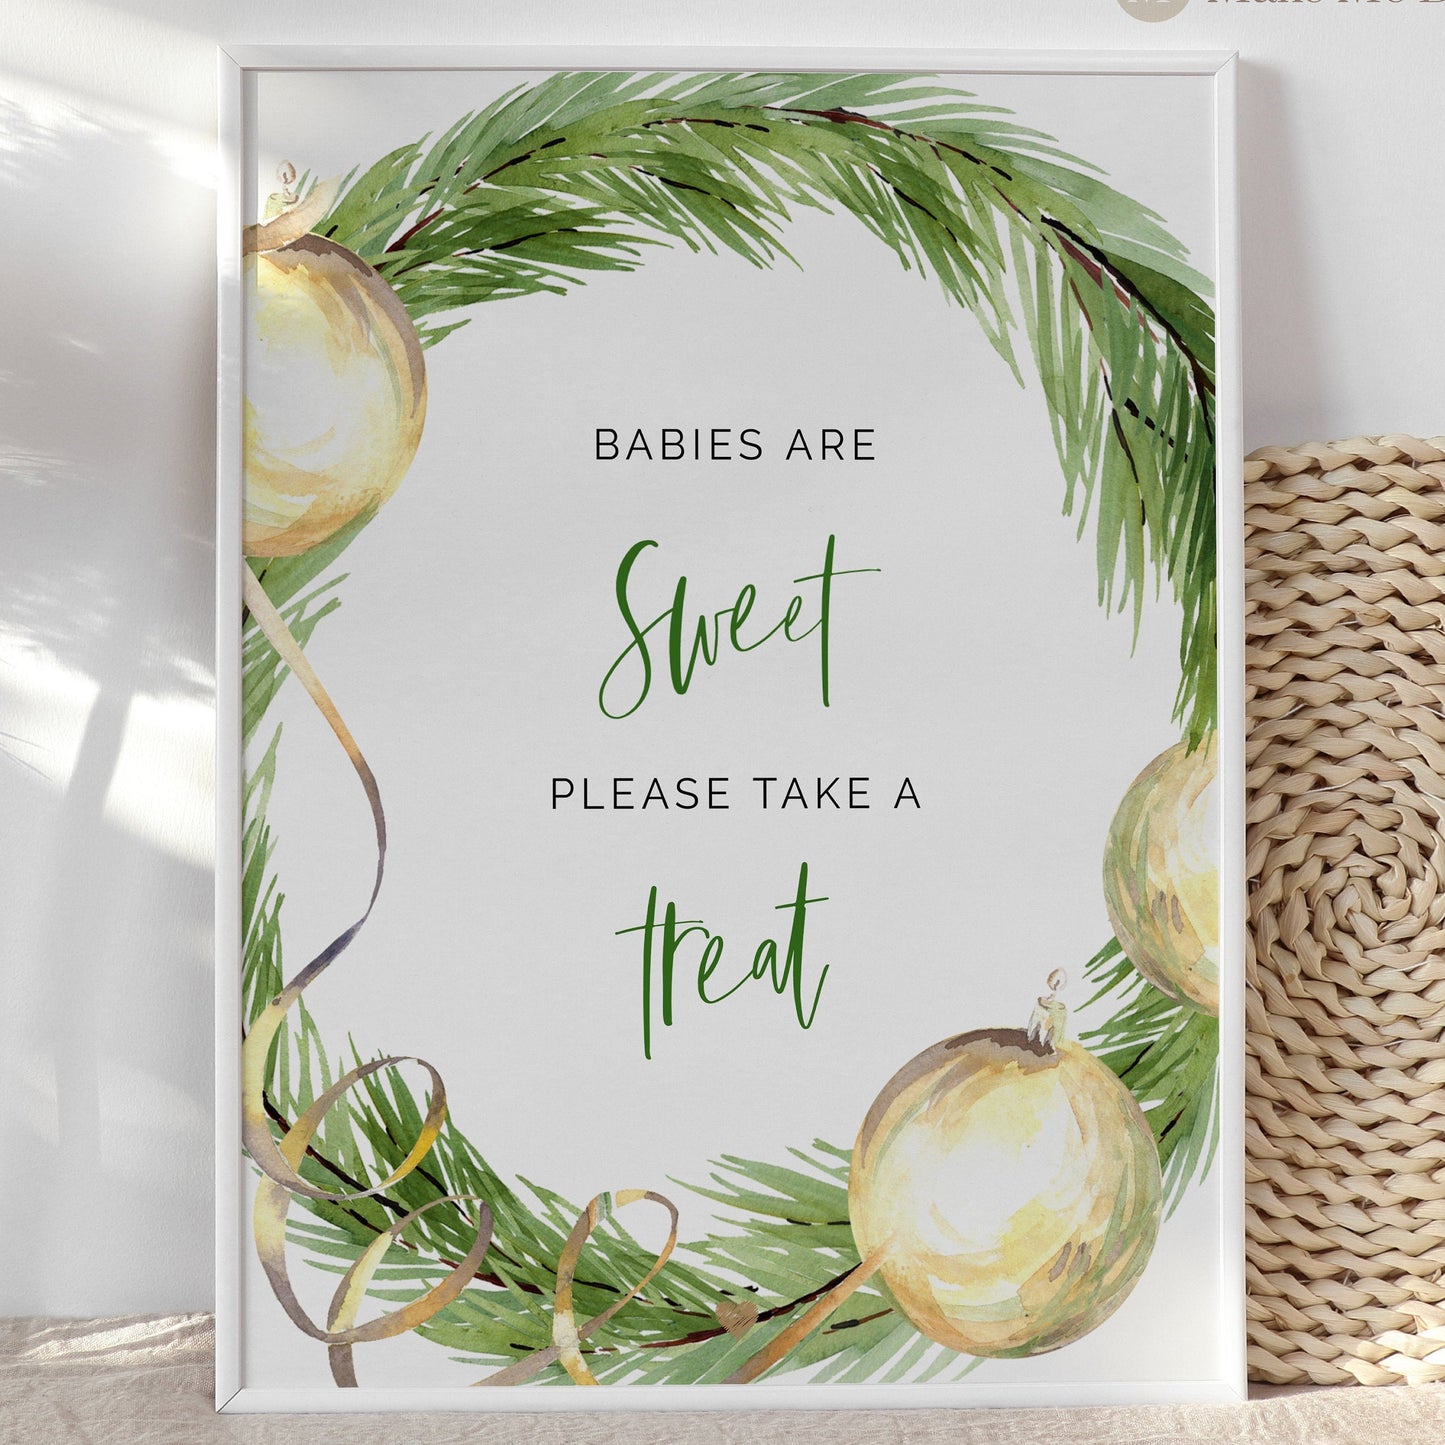 Green & Gold Christmas Babies are Sweet Sign - Make Me Digital: printable event invitations, party games & decor